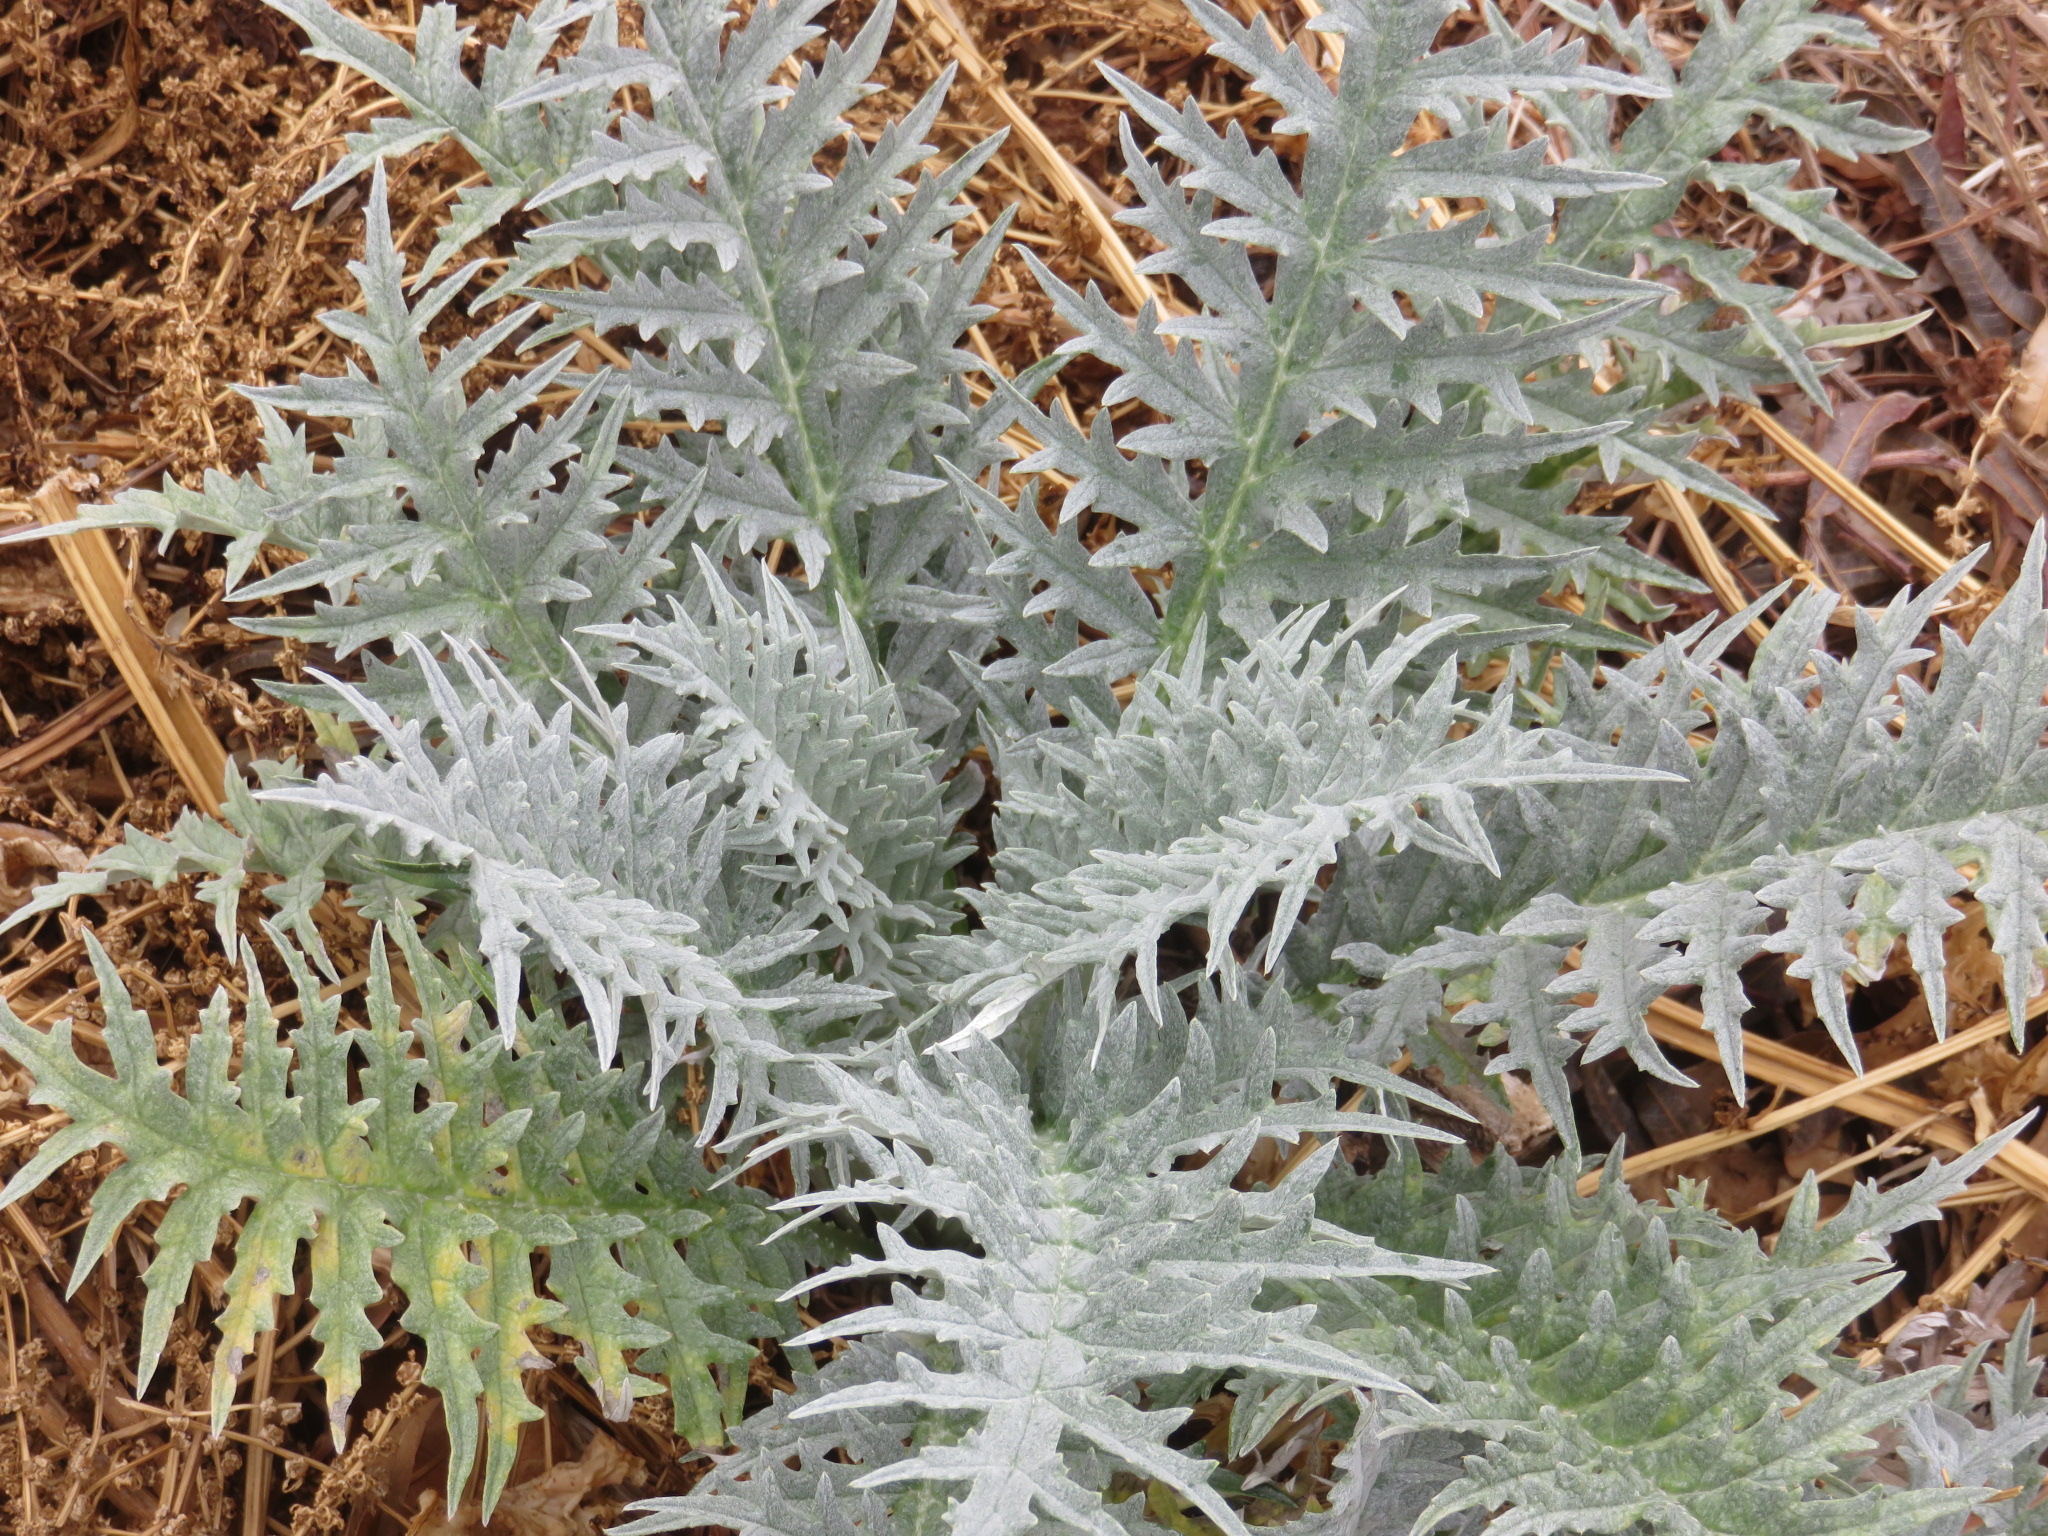 large sculptural leaves like artichoke can be interspersed with tall grassy herbs as seen in the plan below